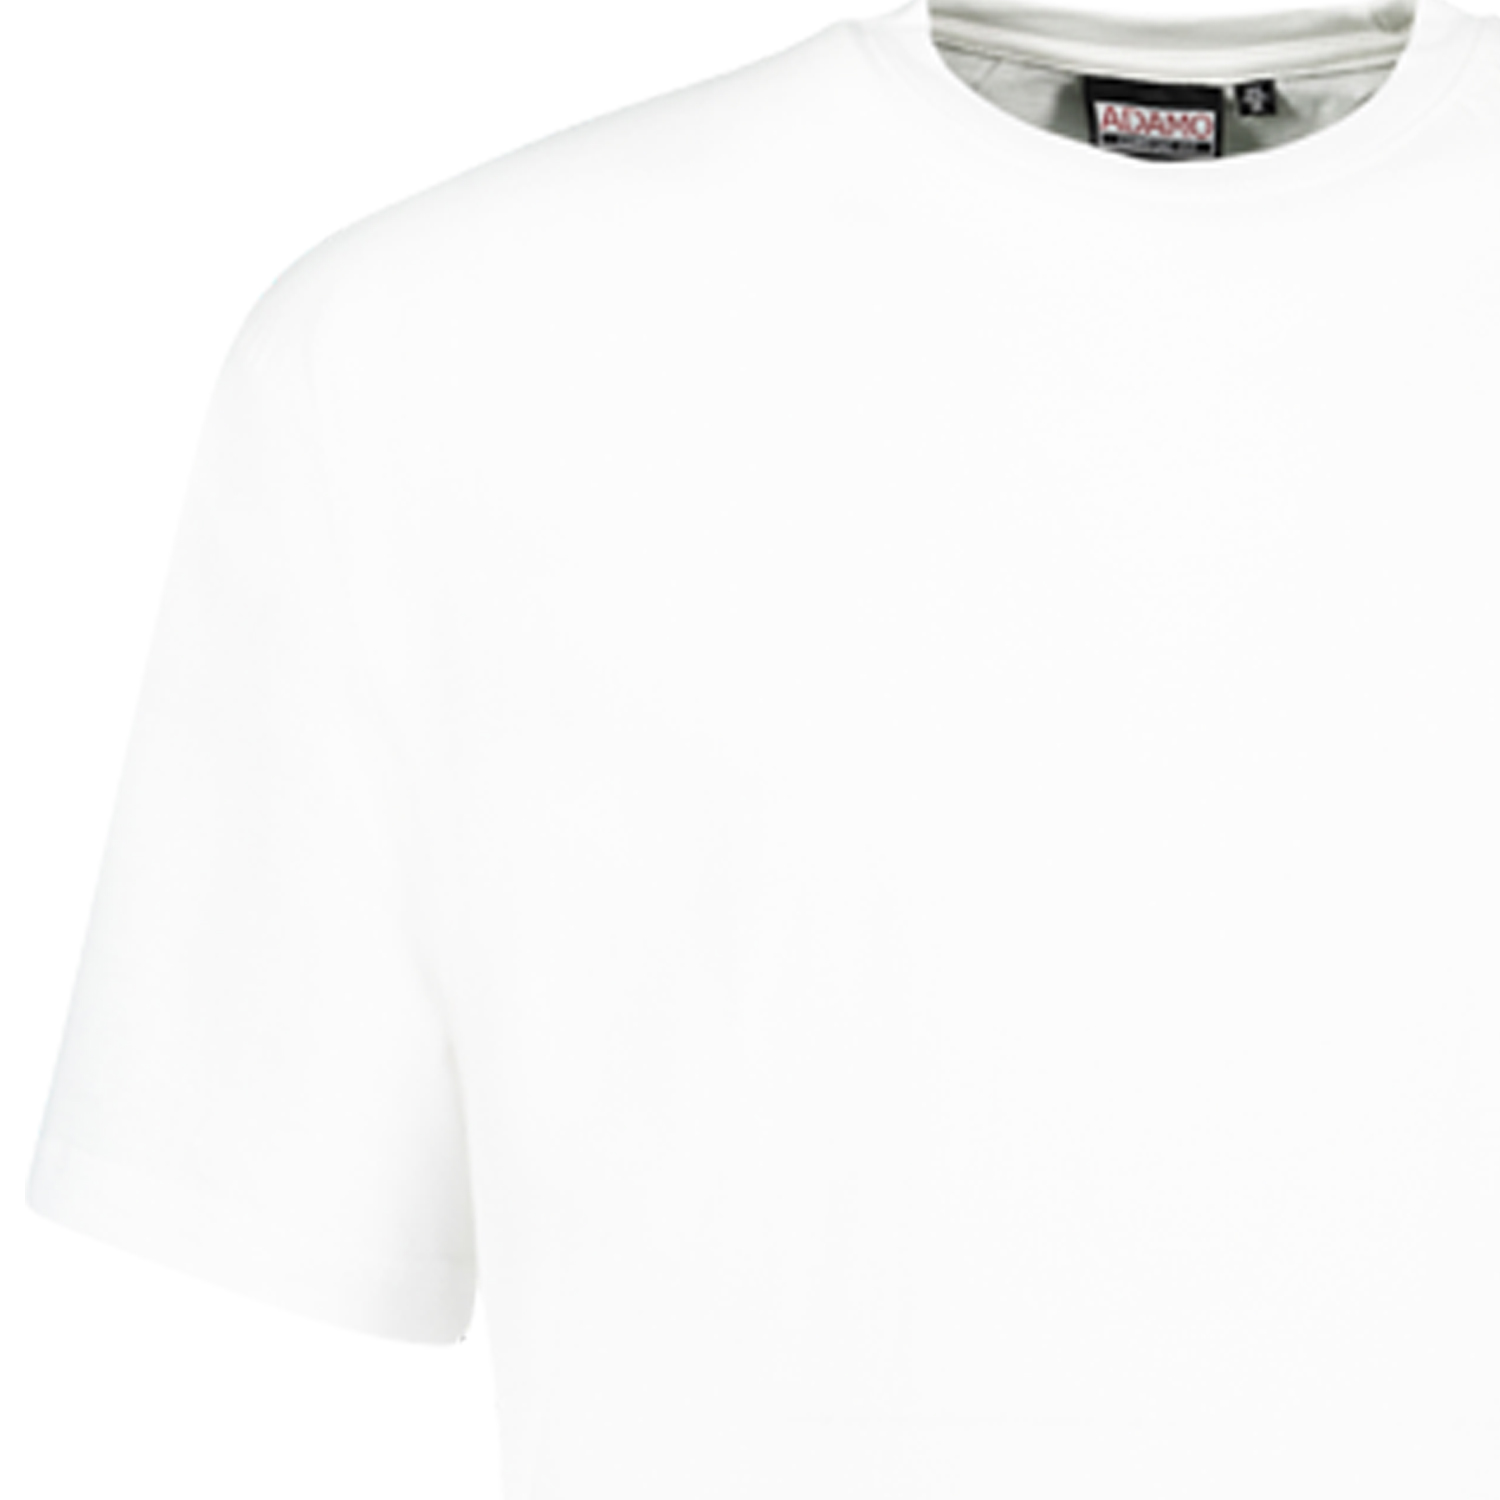 Double pack white MARLON t-shirt COMFORT FIT by ADAMO up to kingsize 12XL